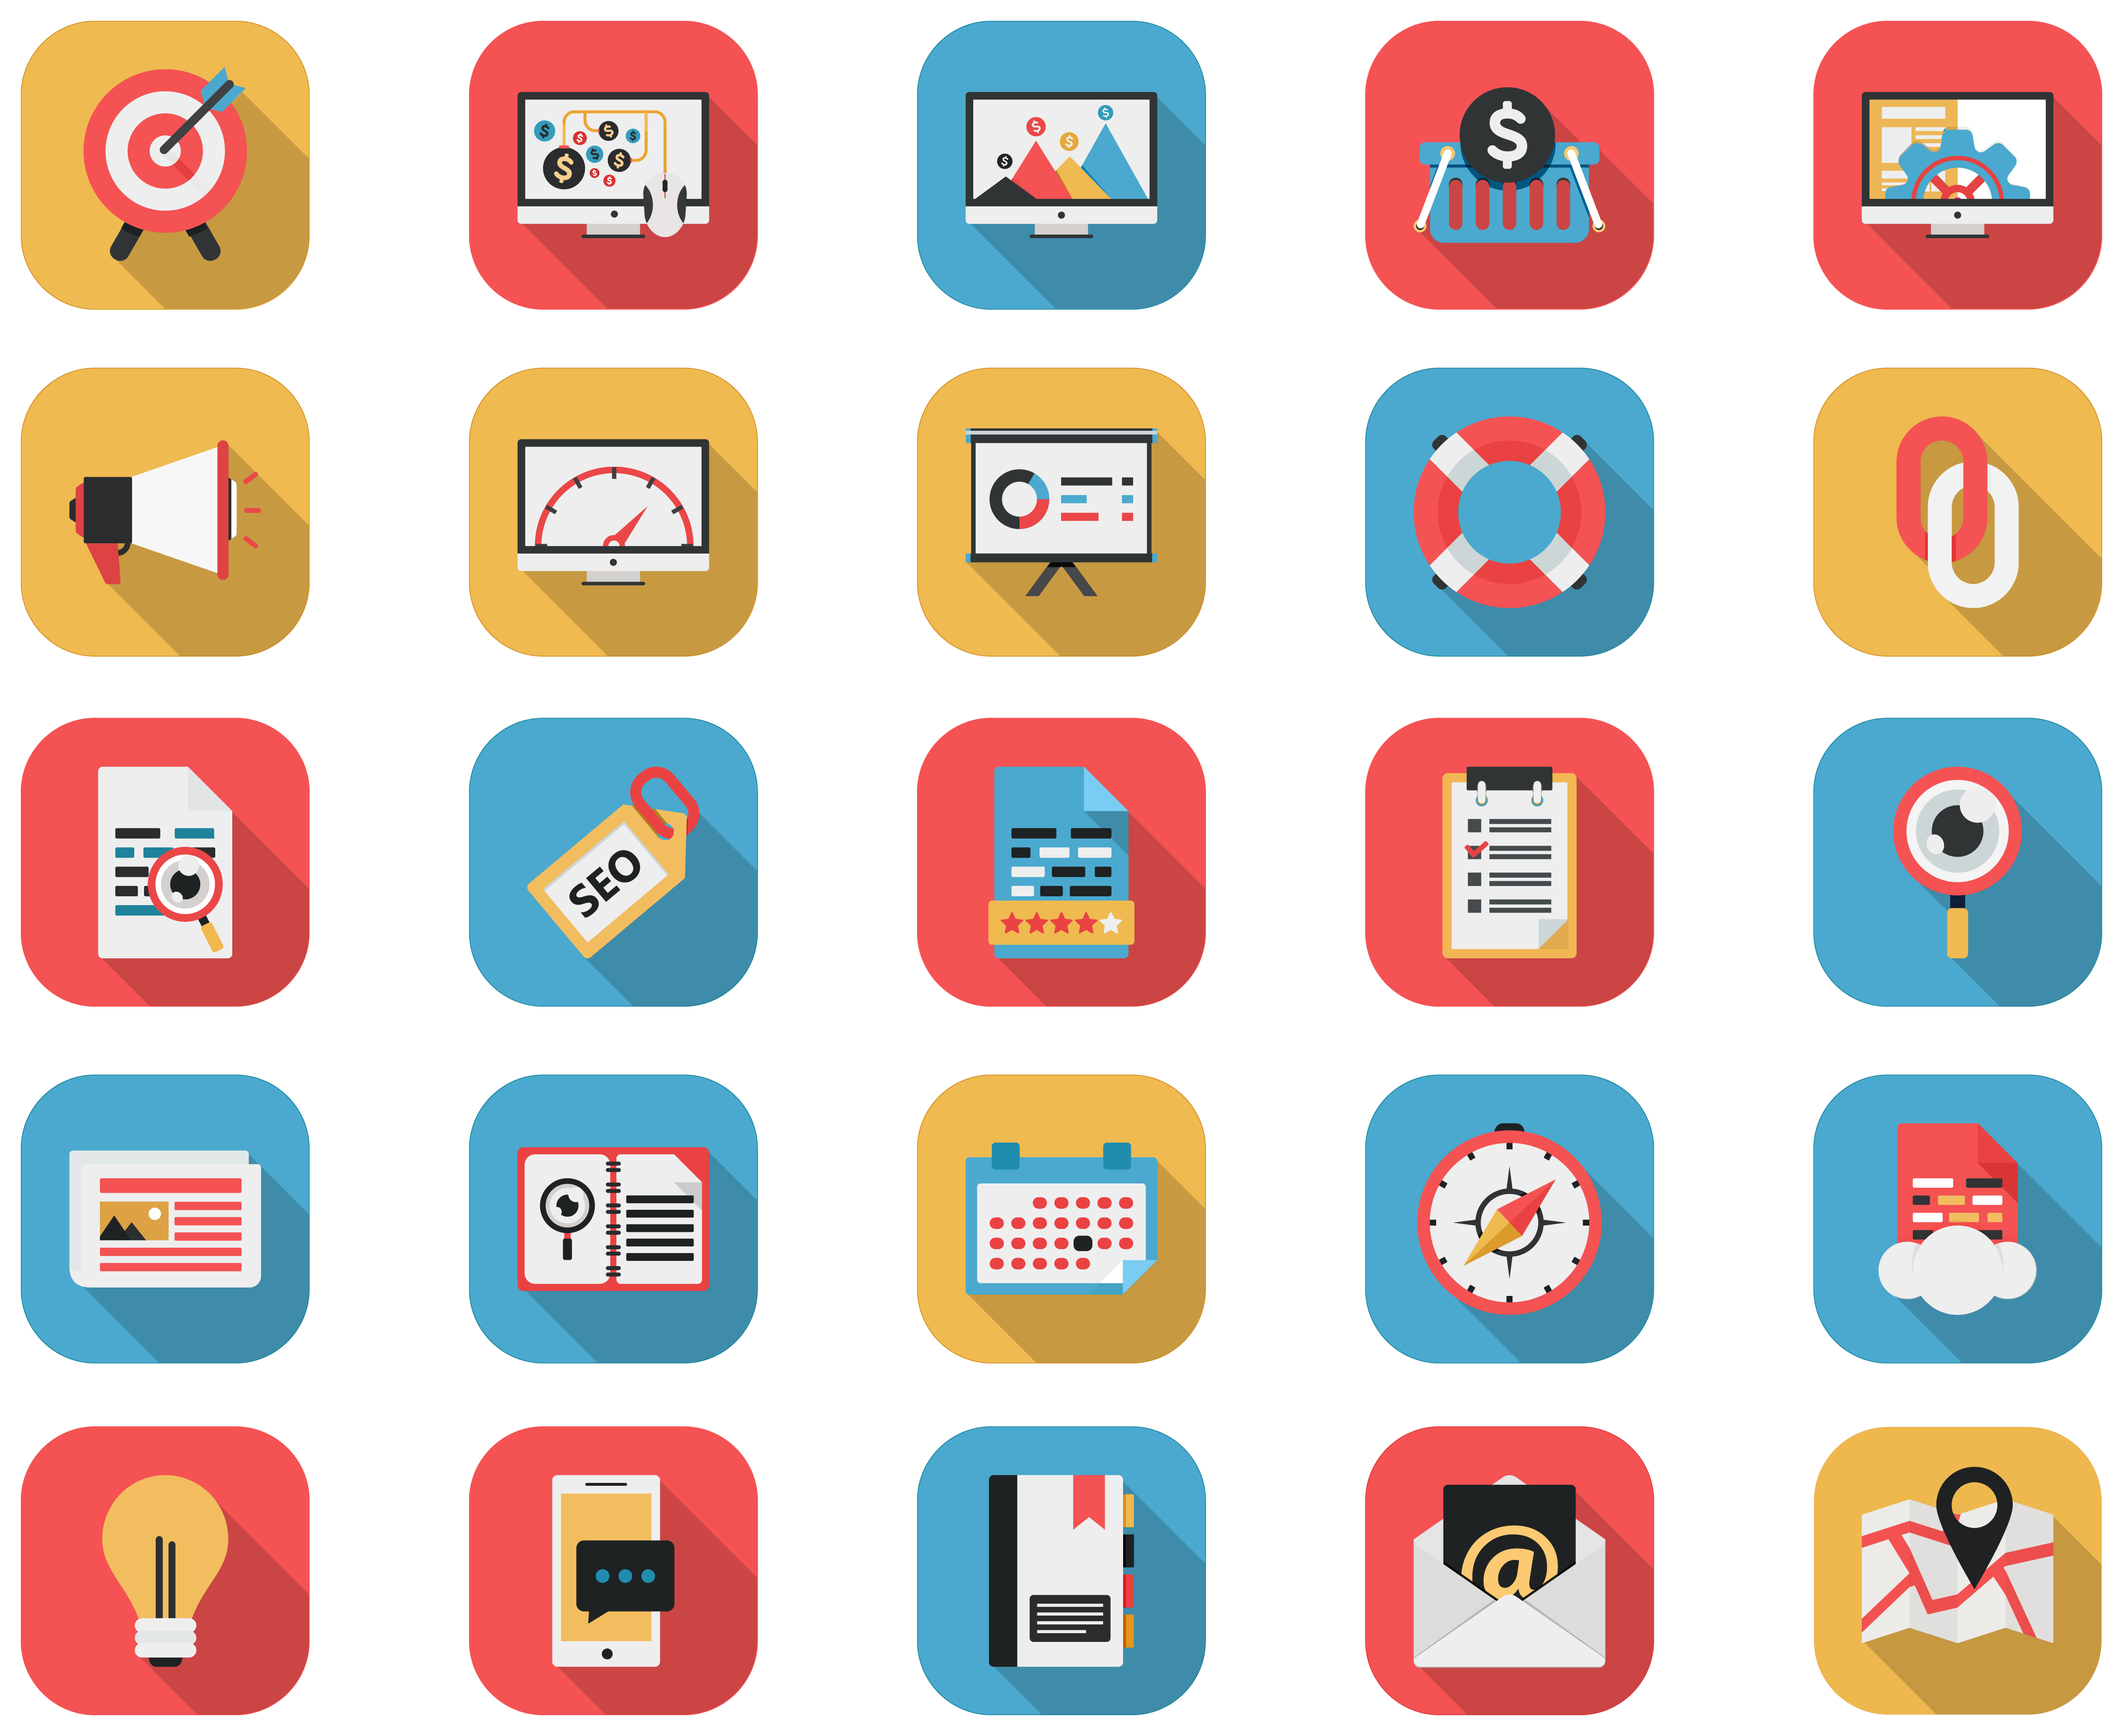 Top 50 Free Icon Sets for Web Designers 2018 | Icon set, Icons and 